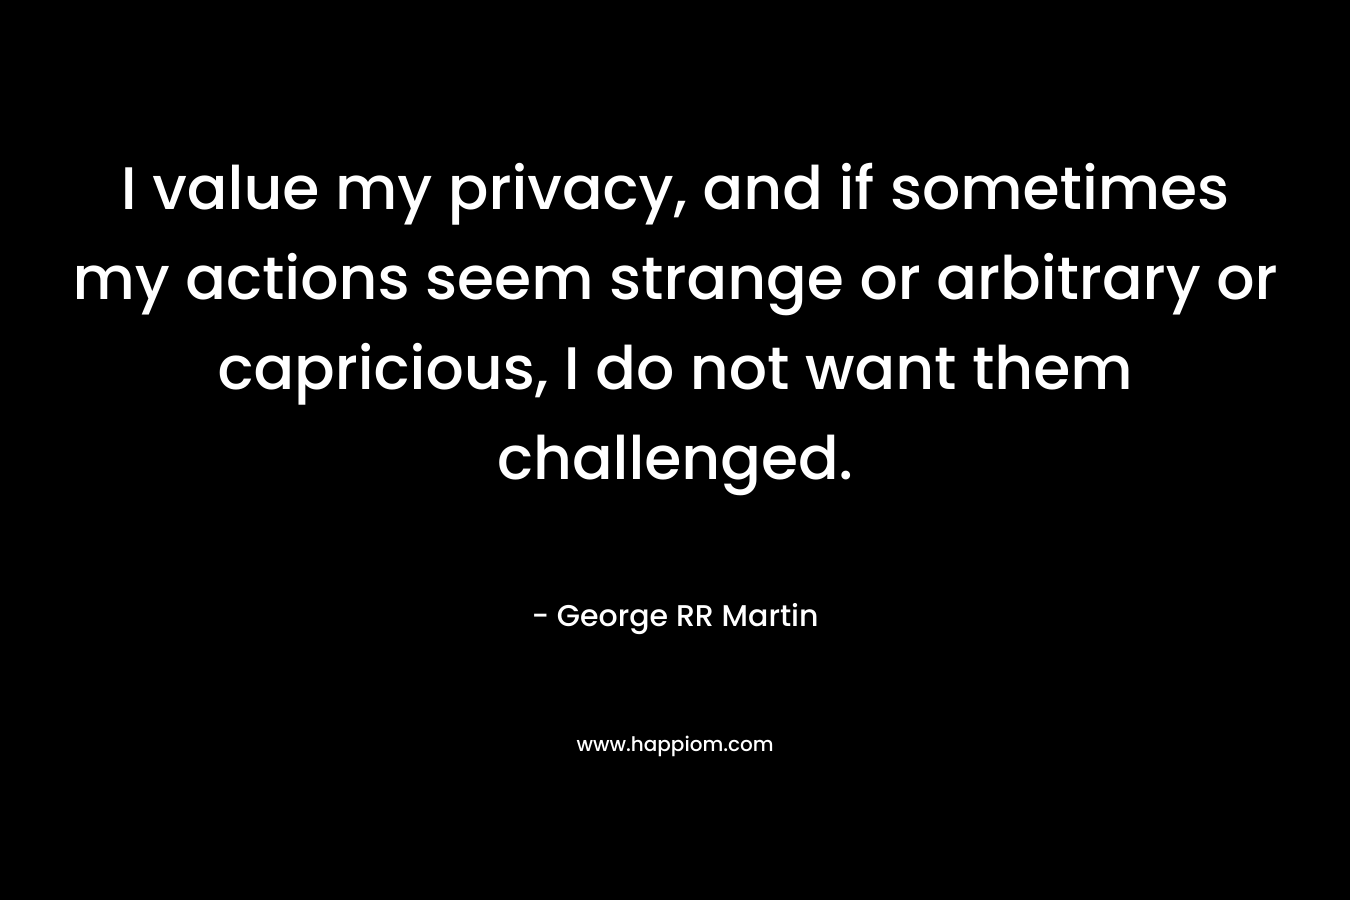 I value my privacy, and if sometimes my actions seem strange or arbitrary or capricious, I do not want them challenged.